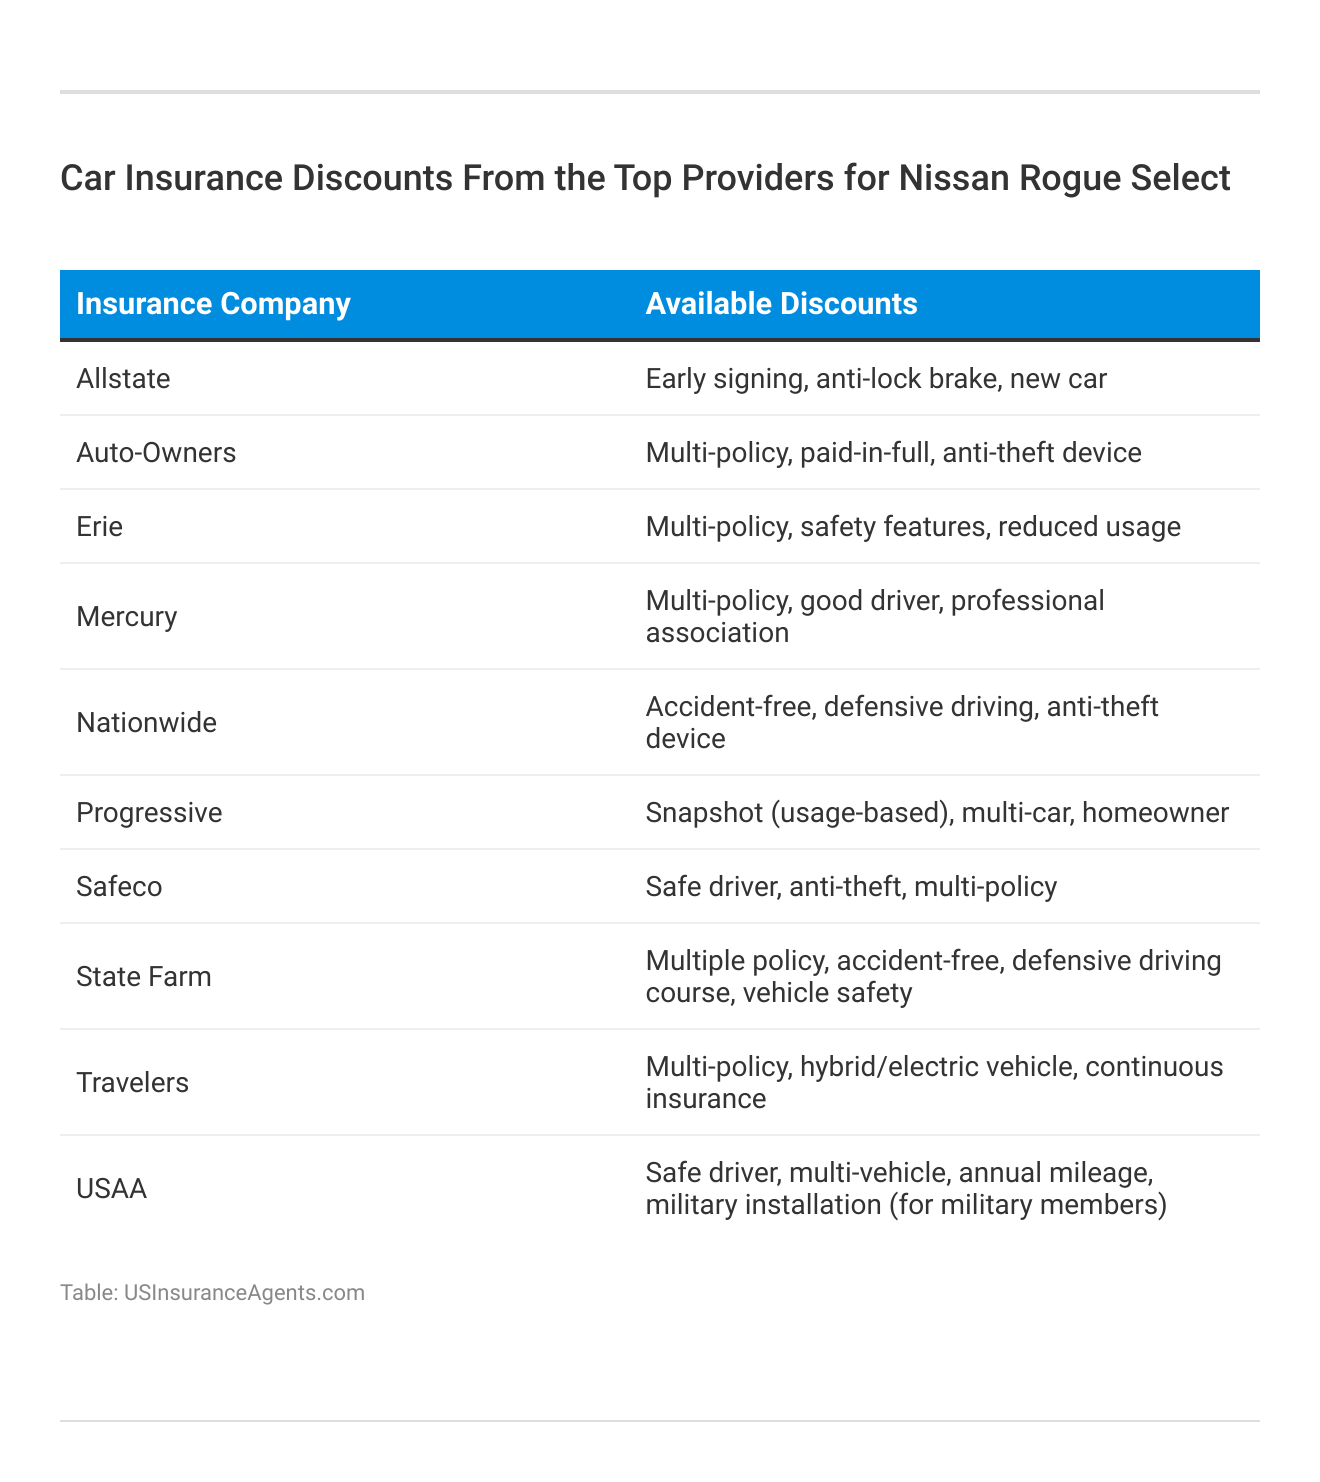 <h3>Car Insurance Discounts From the Top Providers for Nissan Rogue Select</h3>